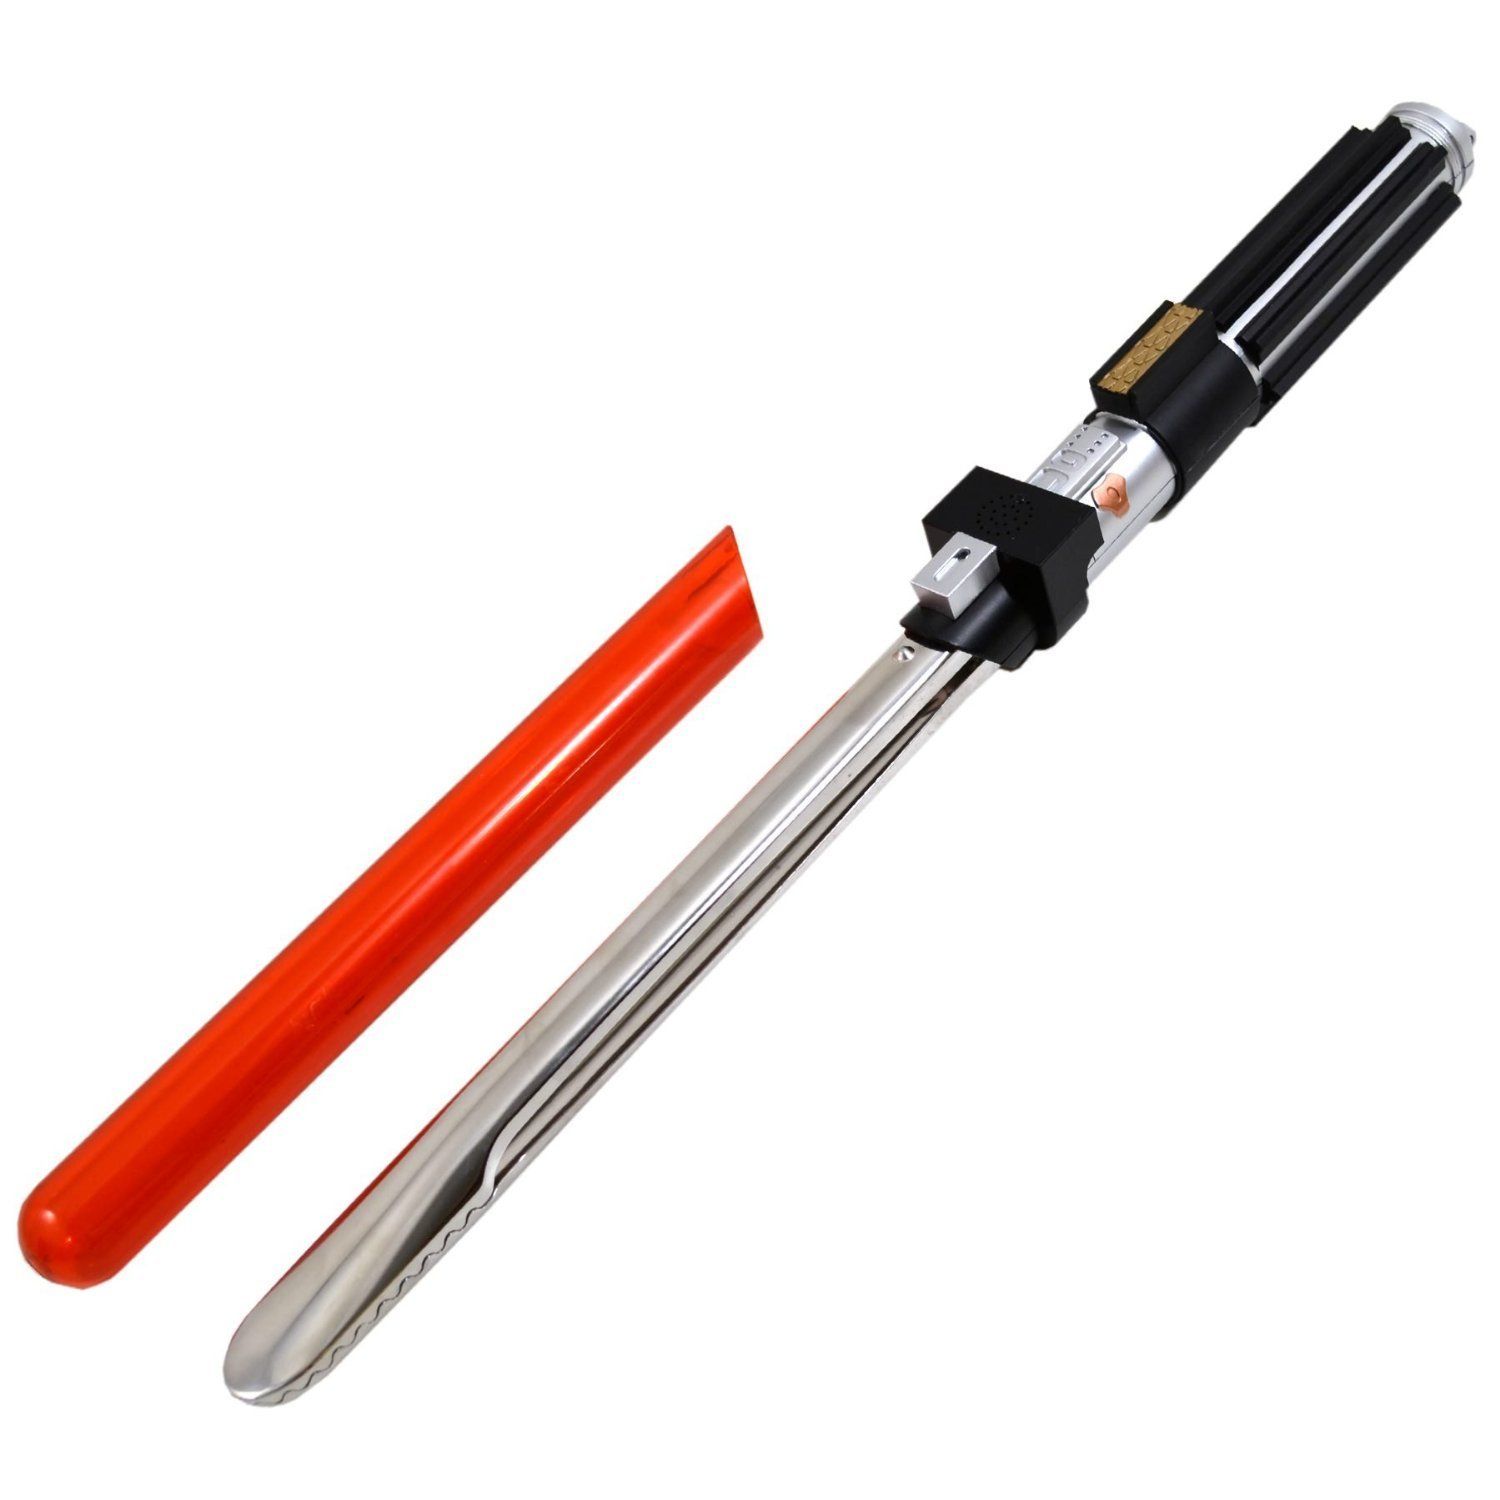 Star Wars Lightsaber BBQ Tongs with Sounds - Barbecue Like a Jedi (22